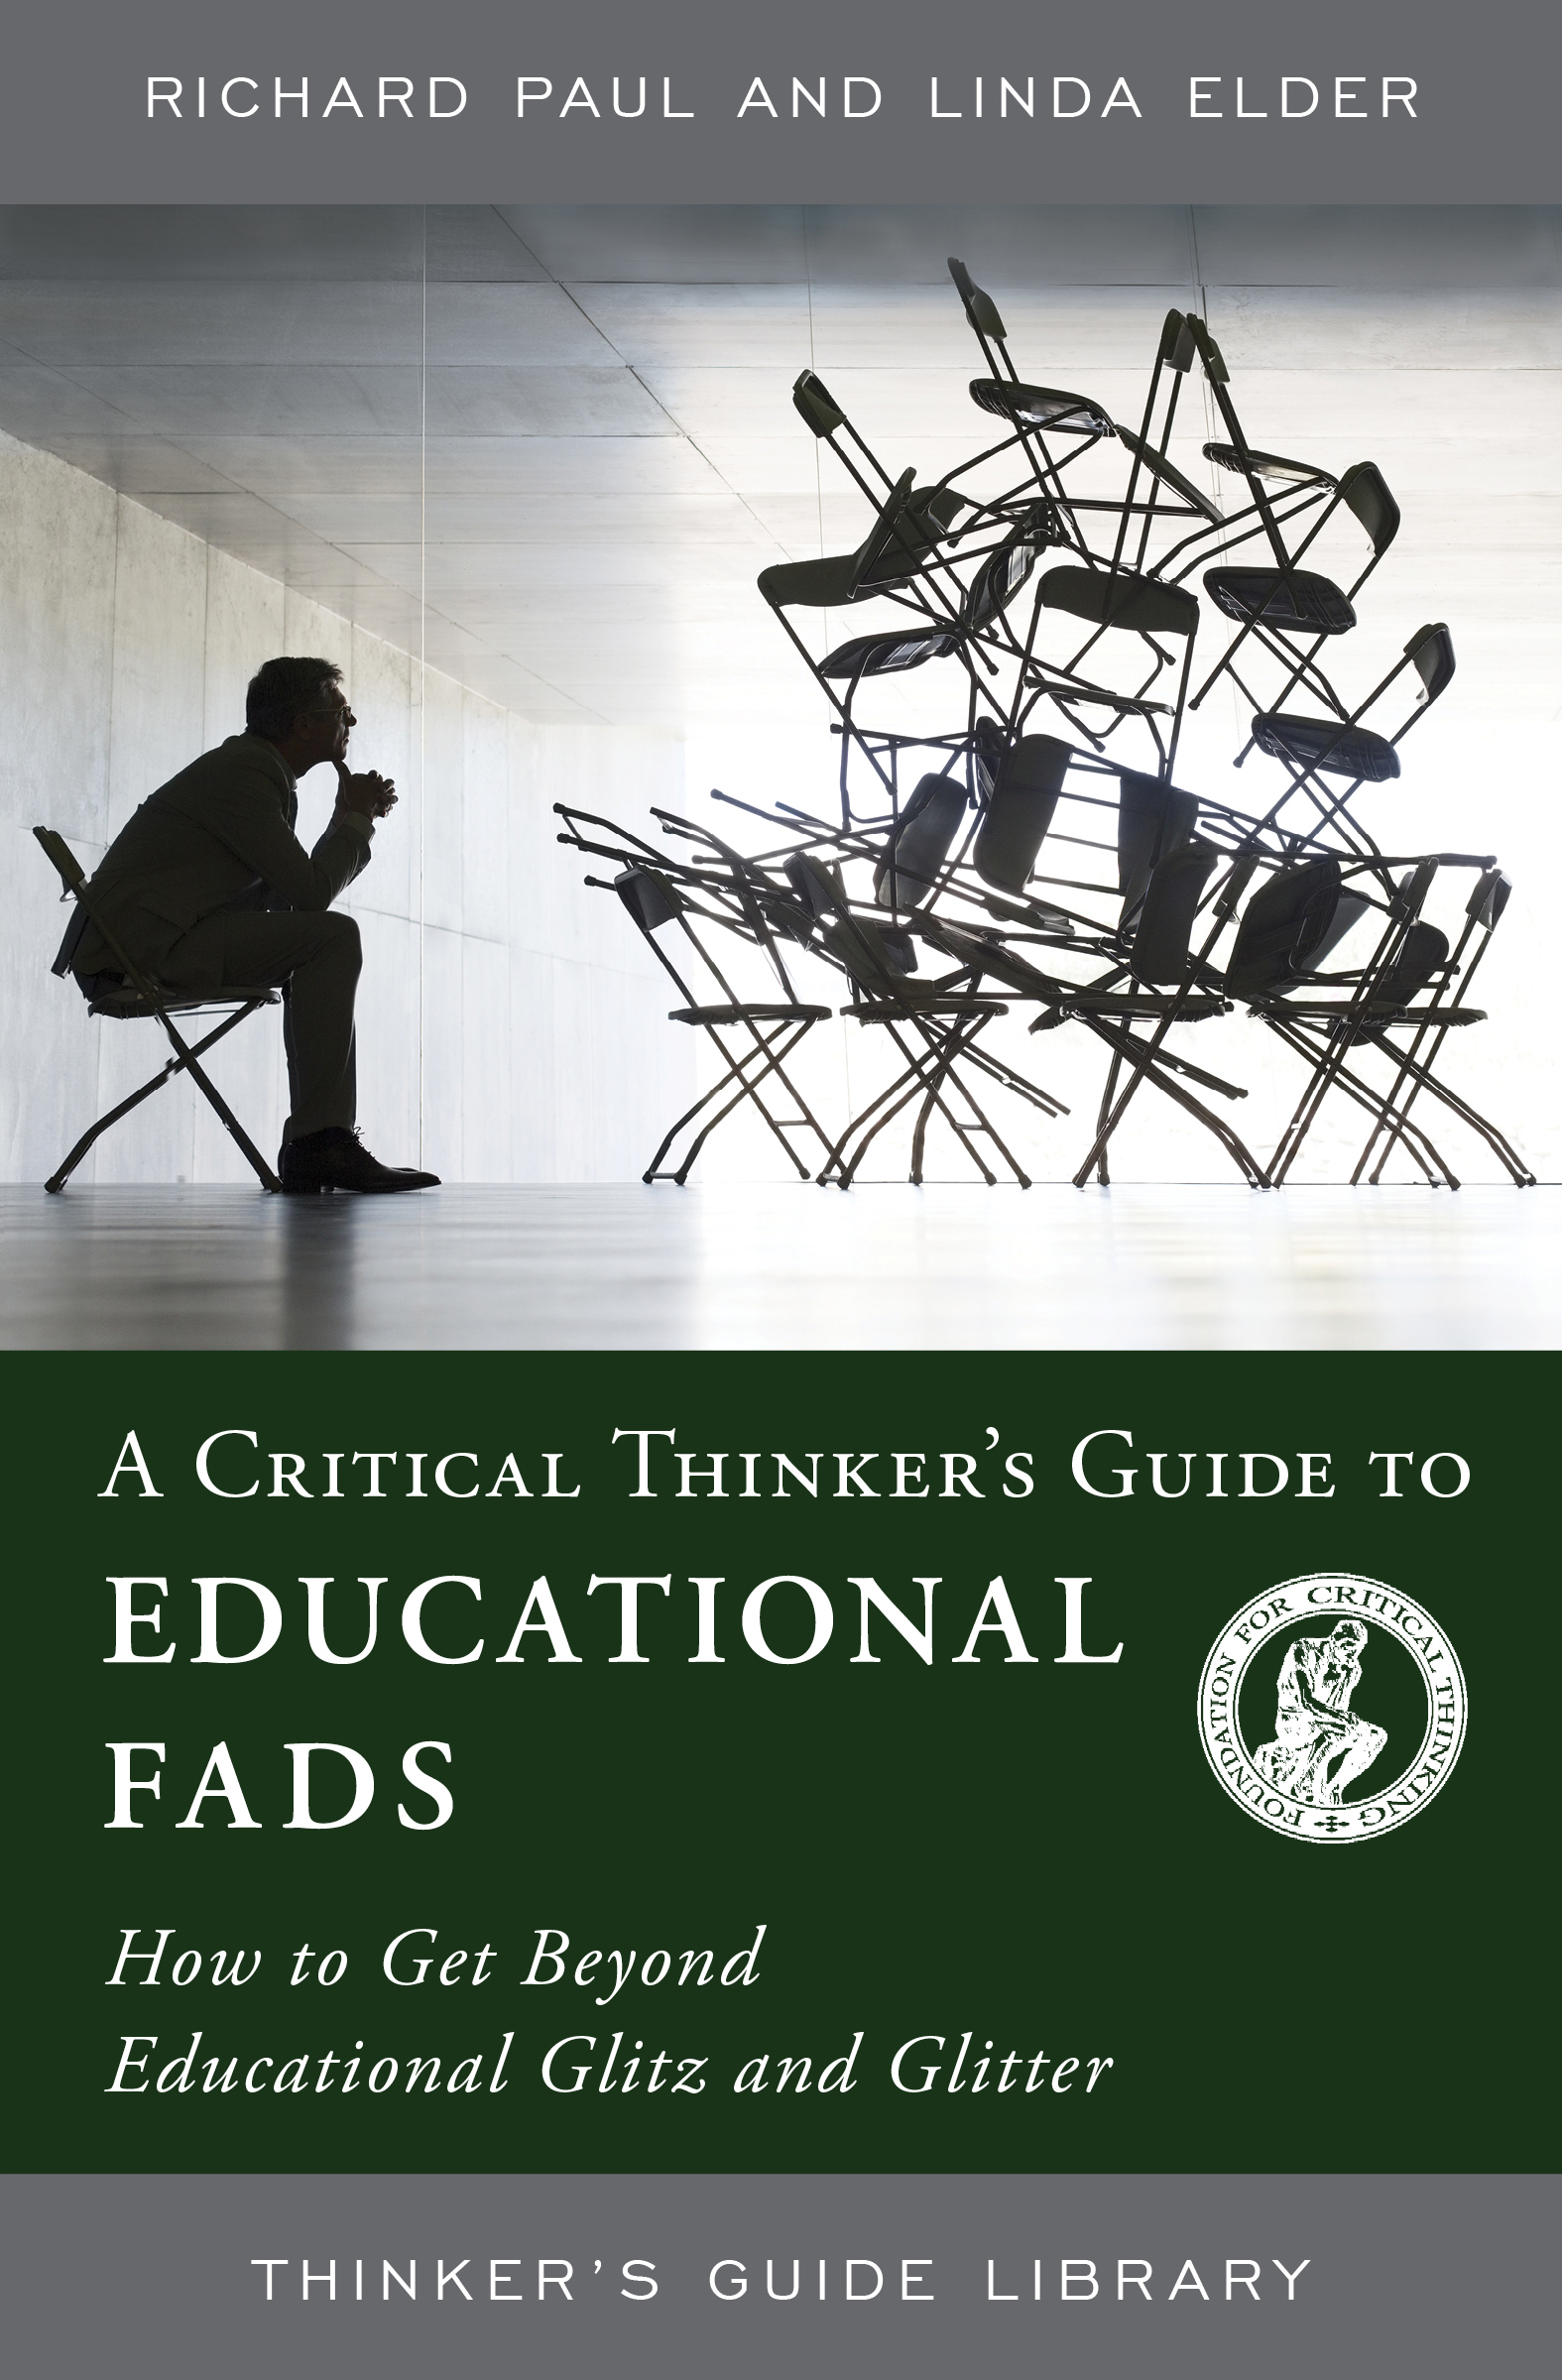 A Critical Thinker's Guide to Educational Fads: How to Get Beyond Educational Glitz and Glitter